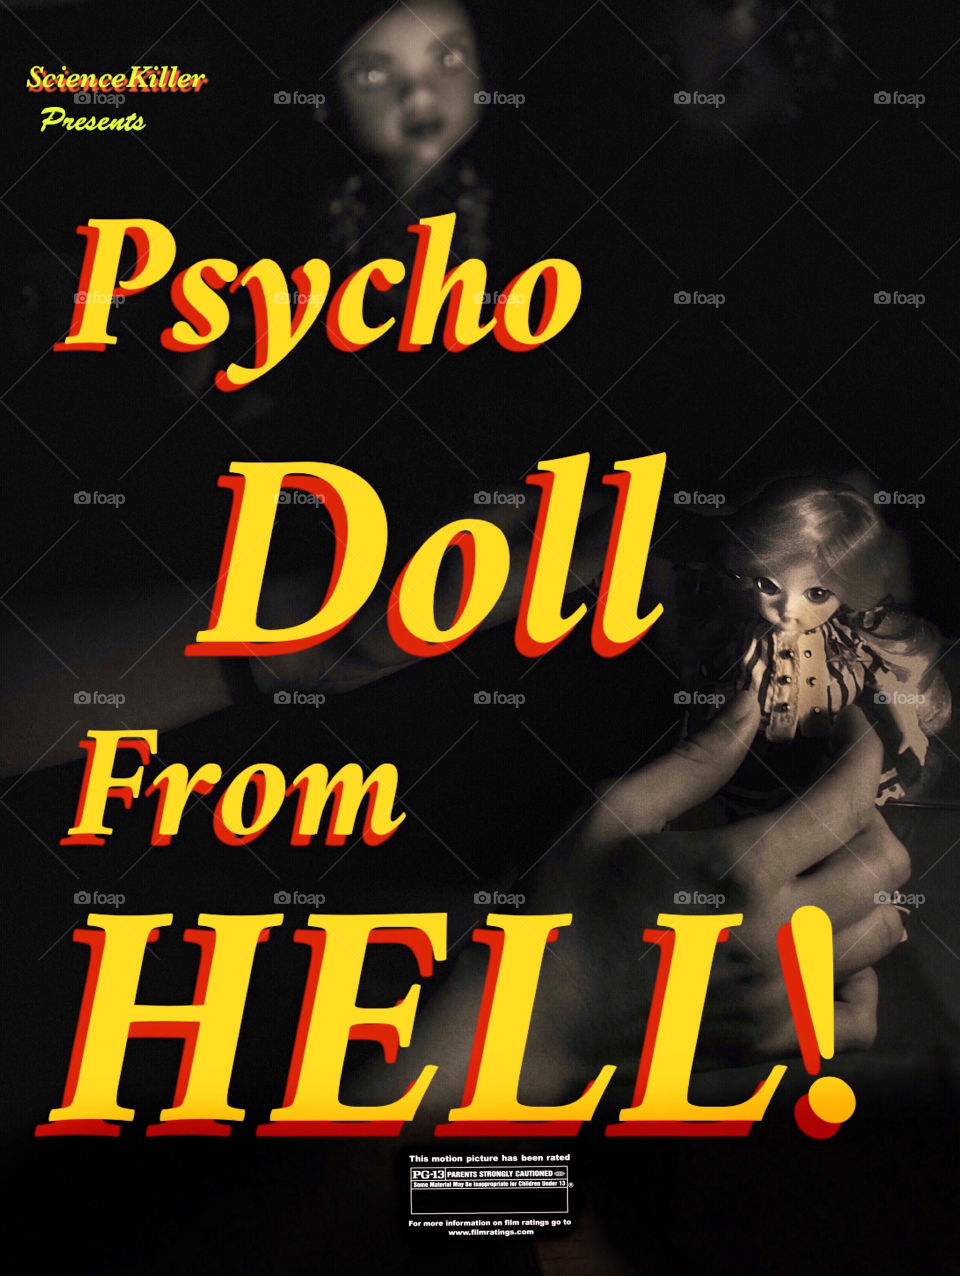 Psycho Doll From Hell! (Fake B-movie poster)